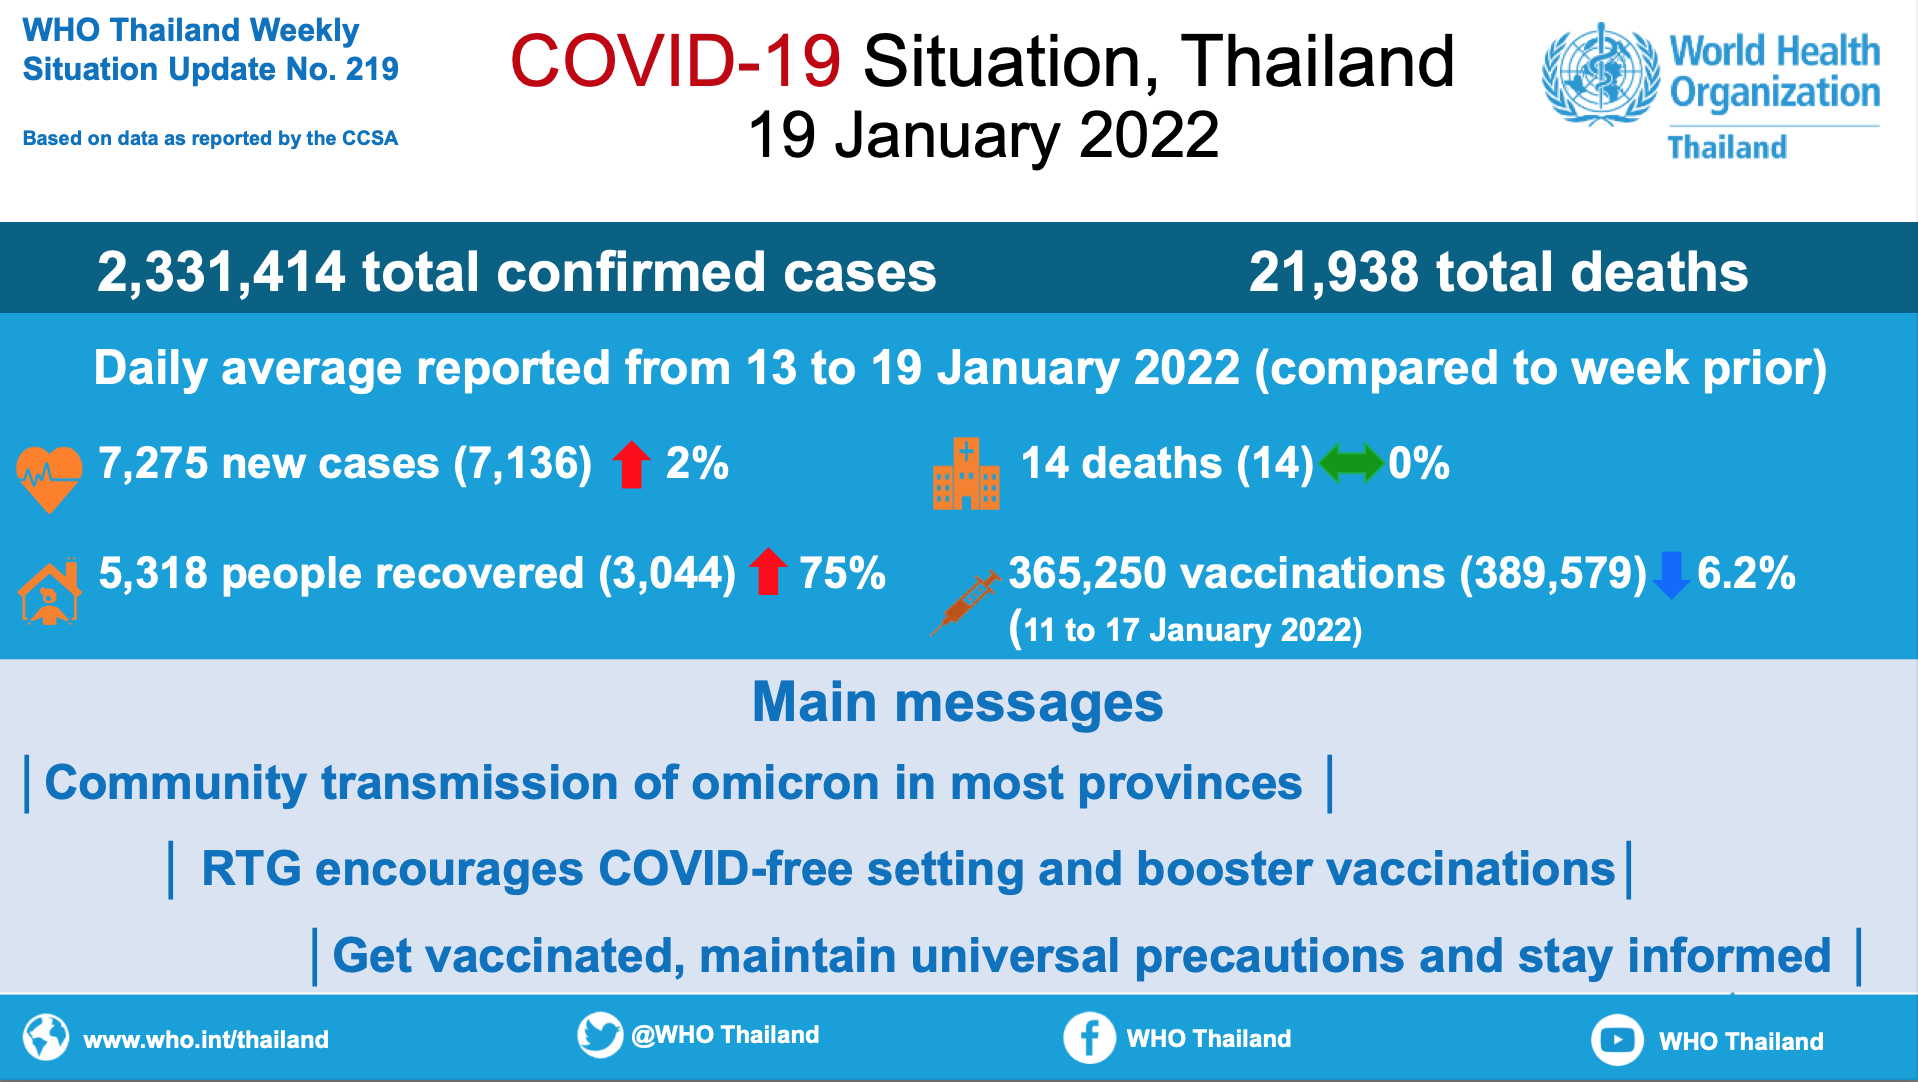 COVID-19 Weekly Situation Update (19 January 2022) No. 219